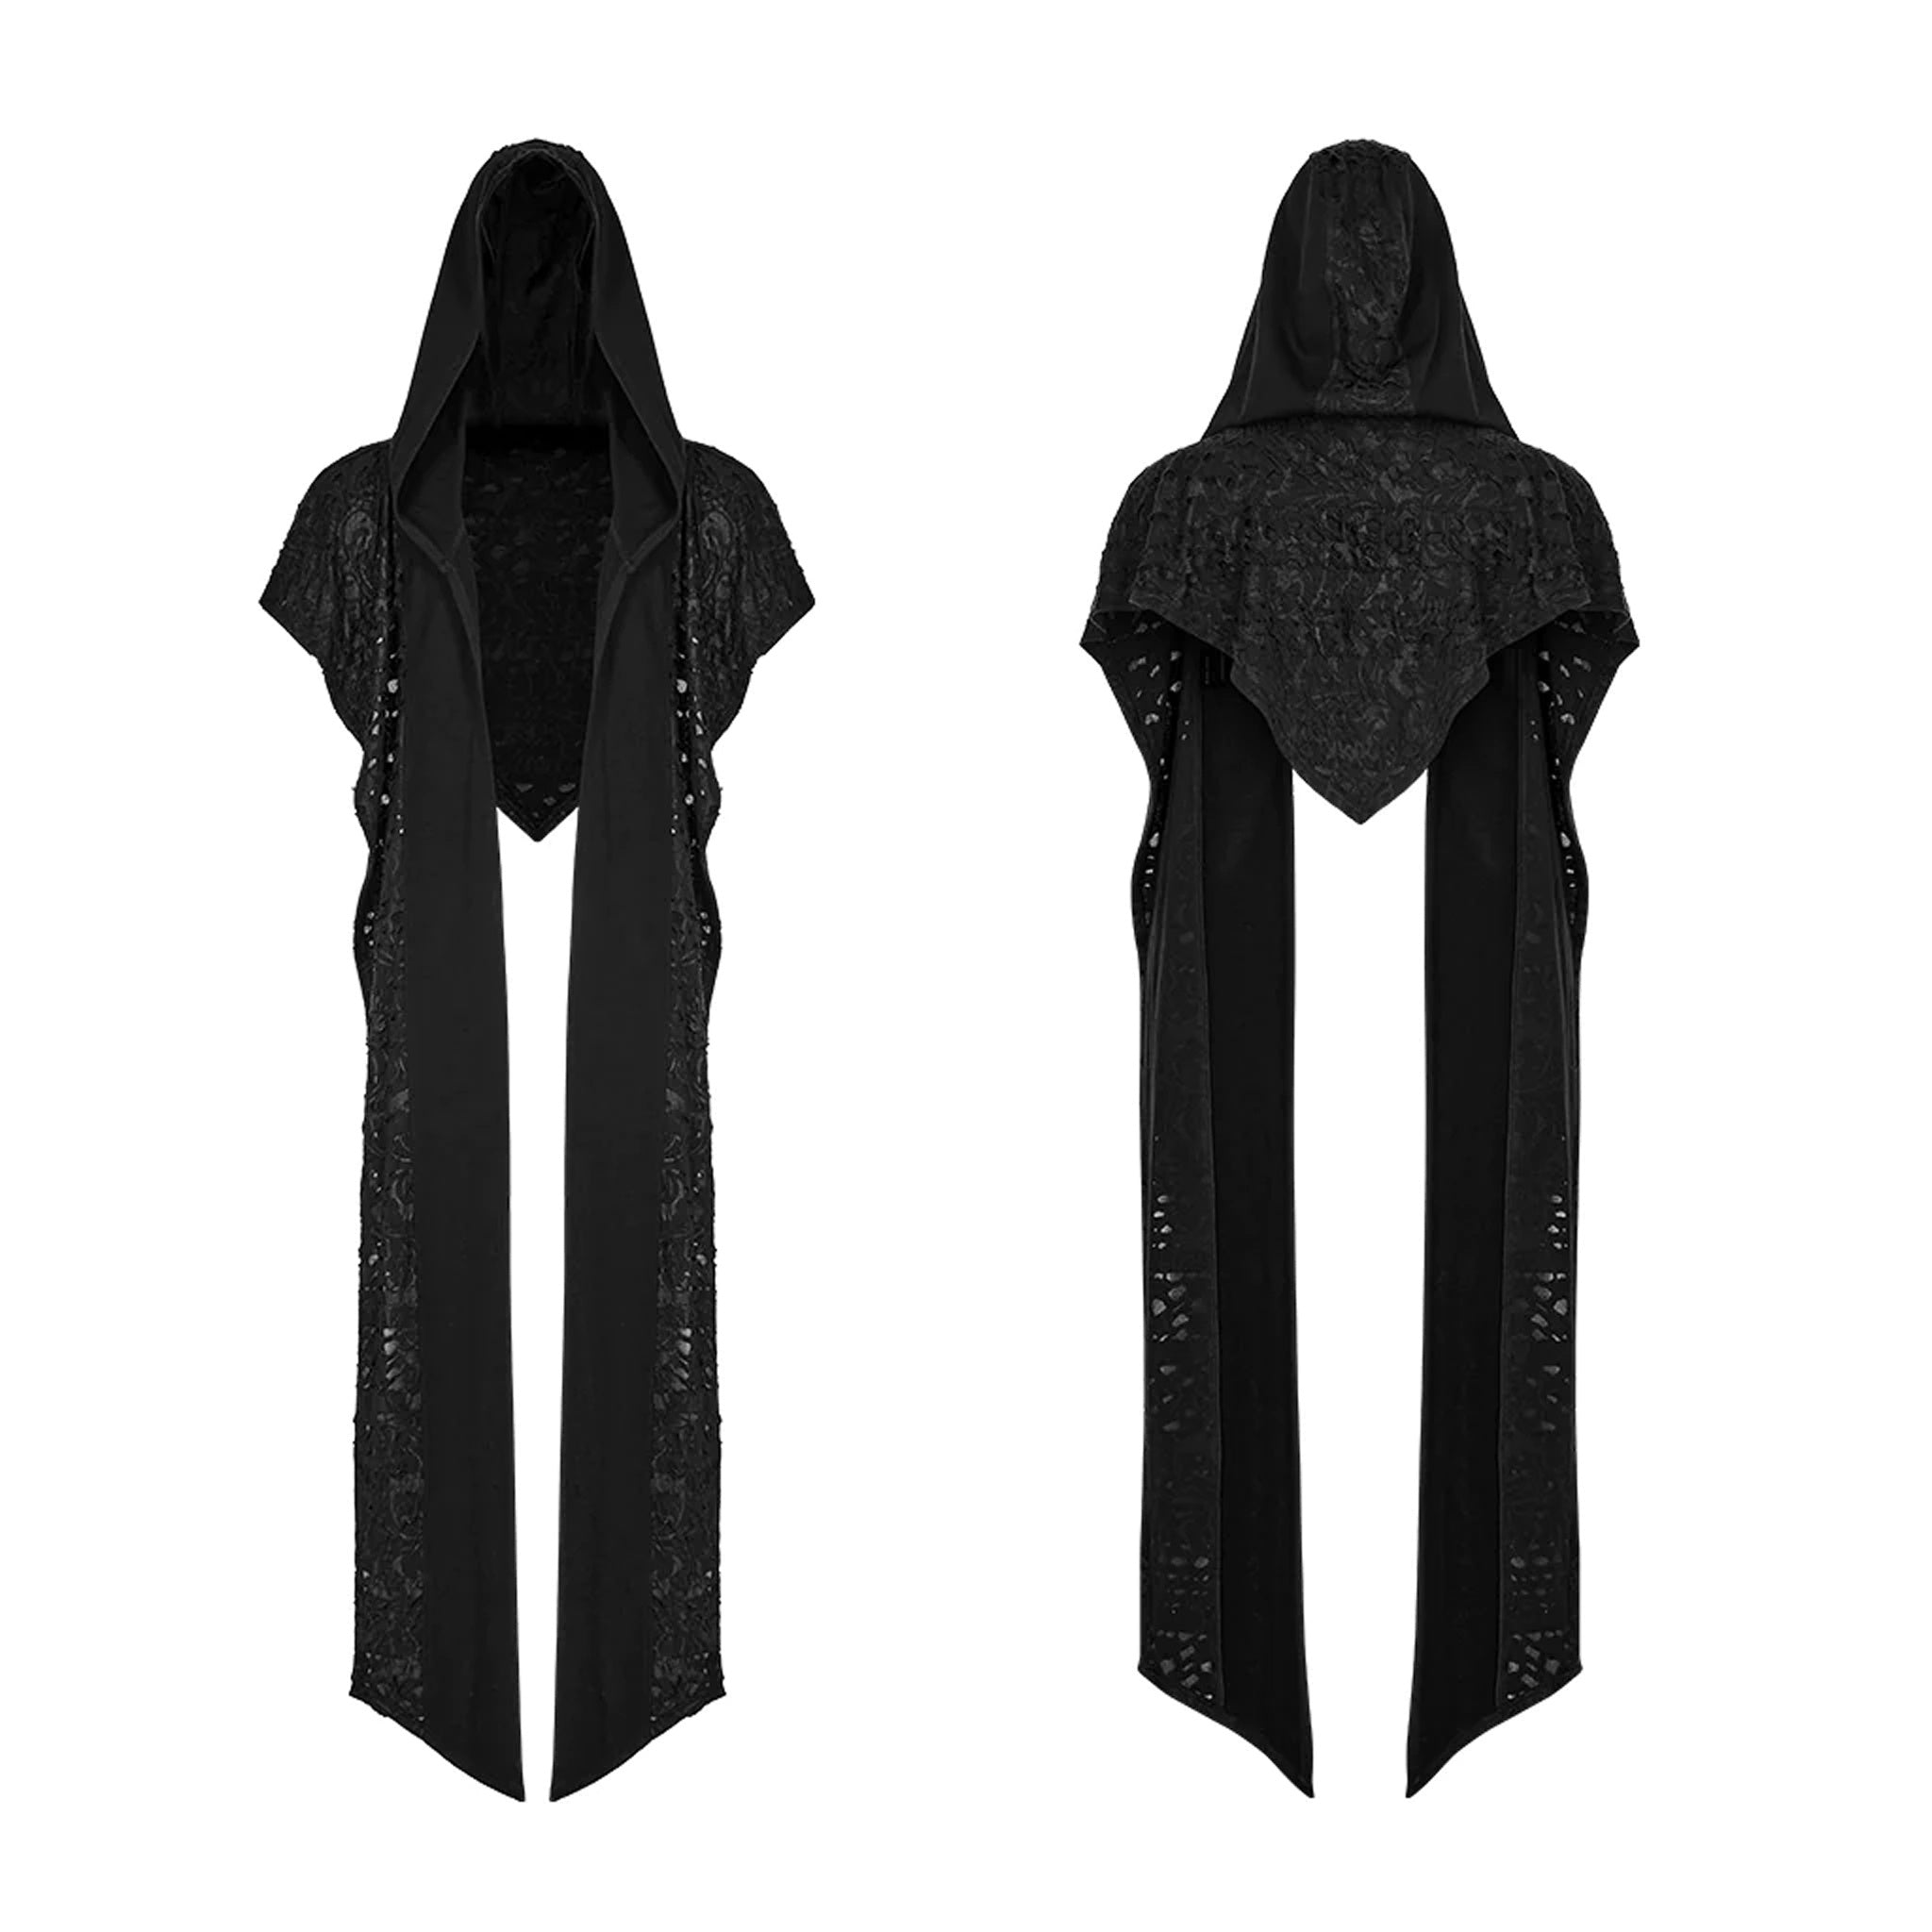 Decayed Hooded Scarf